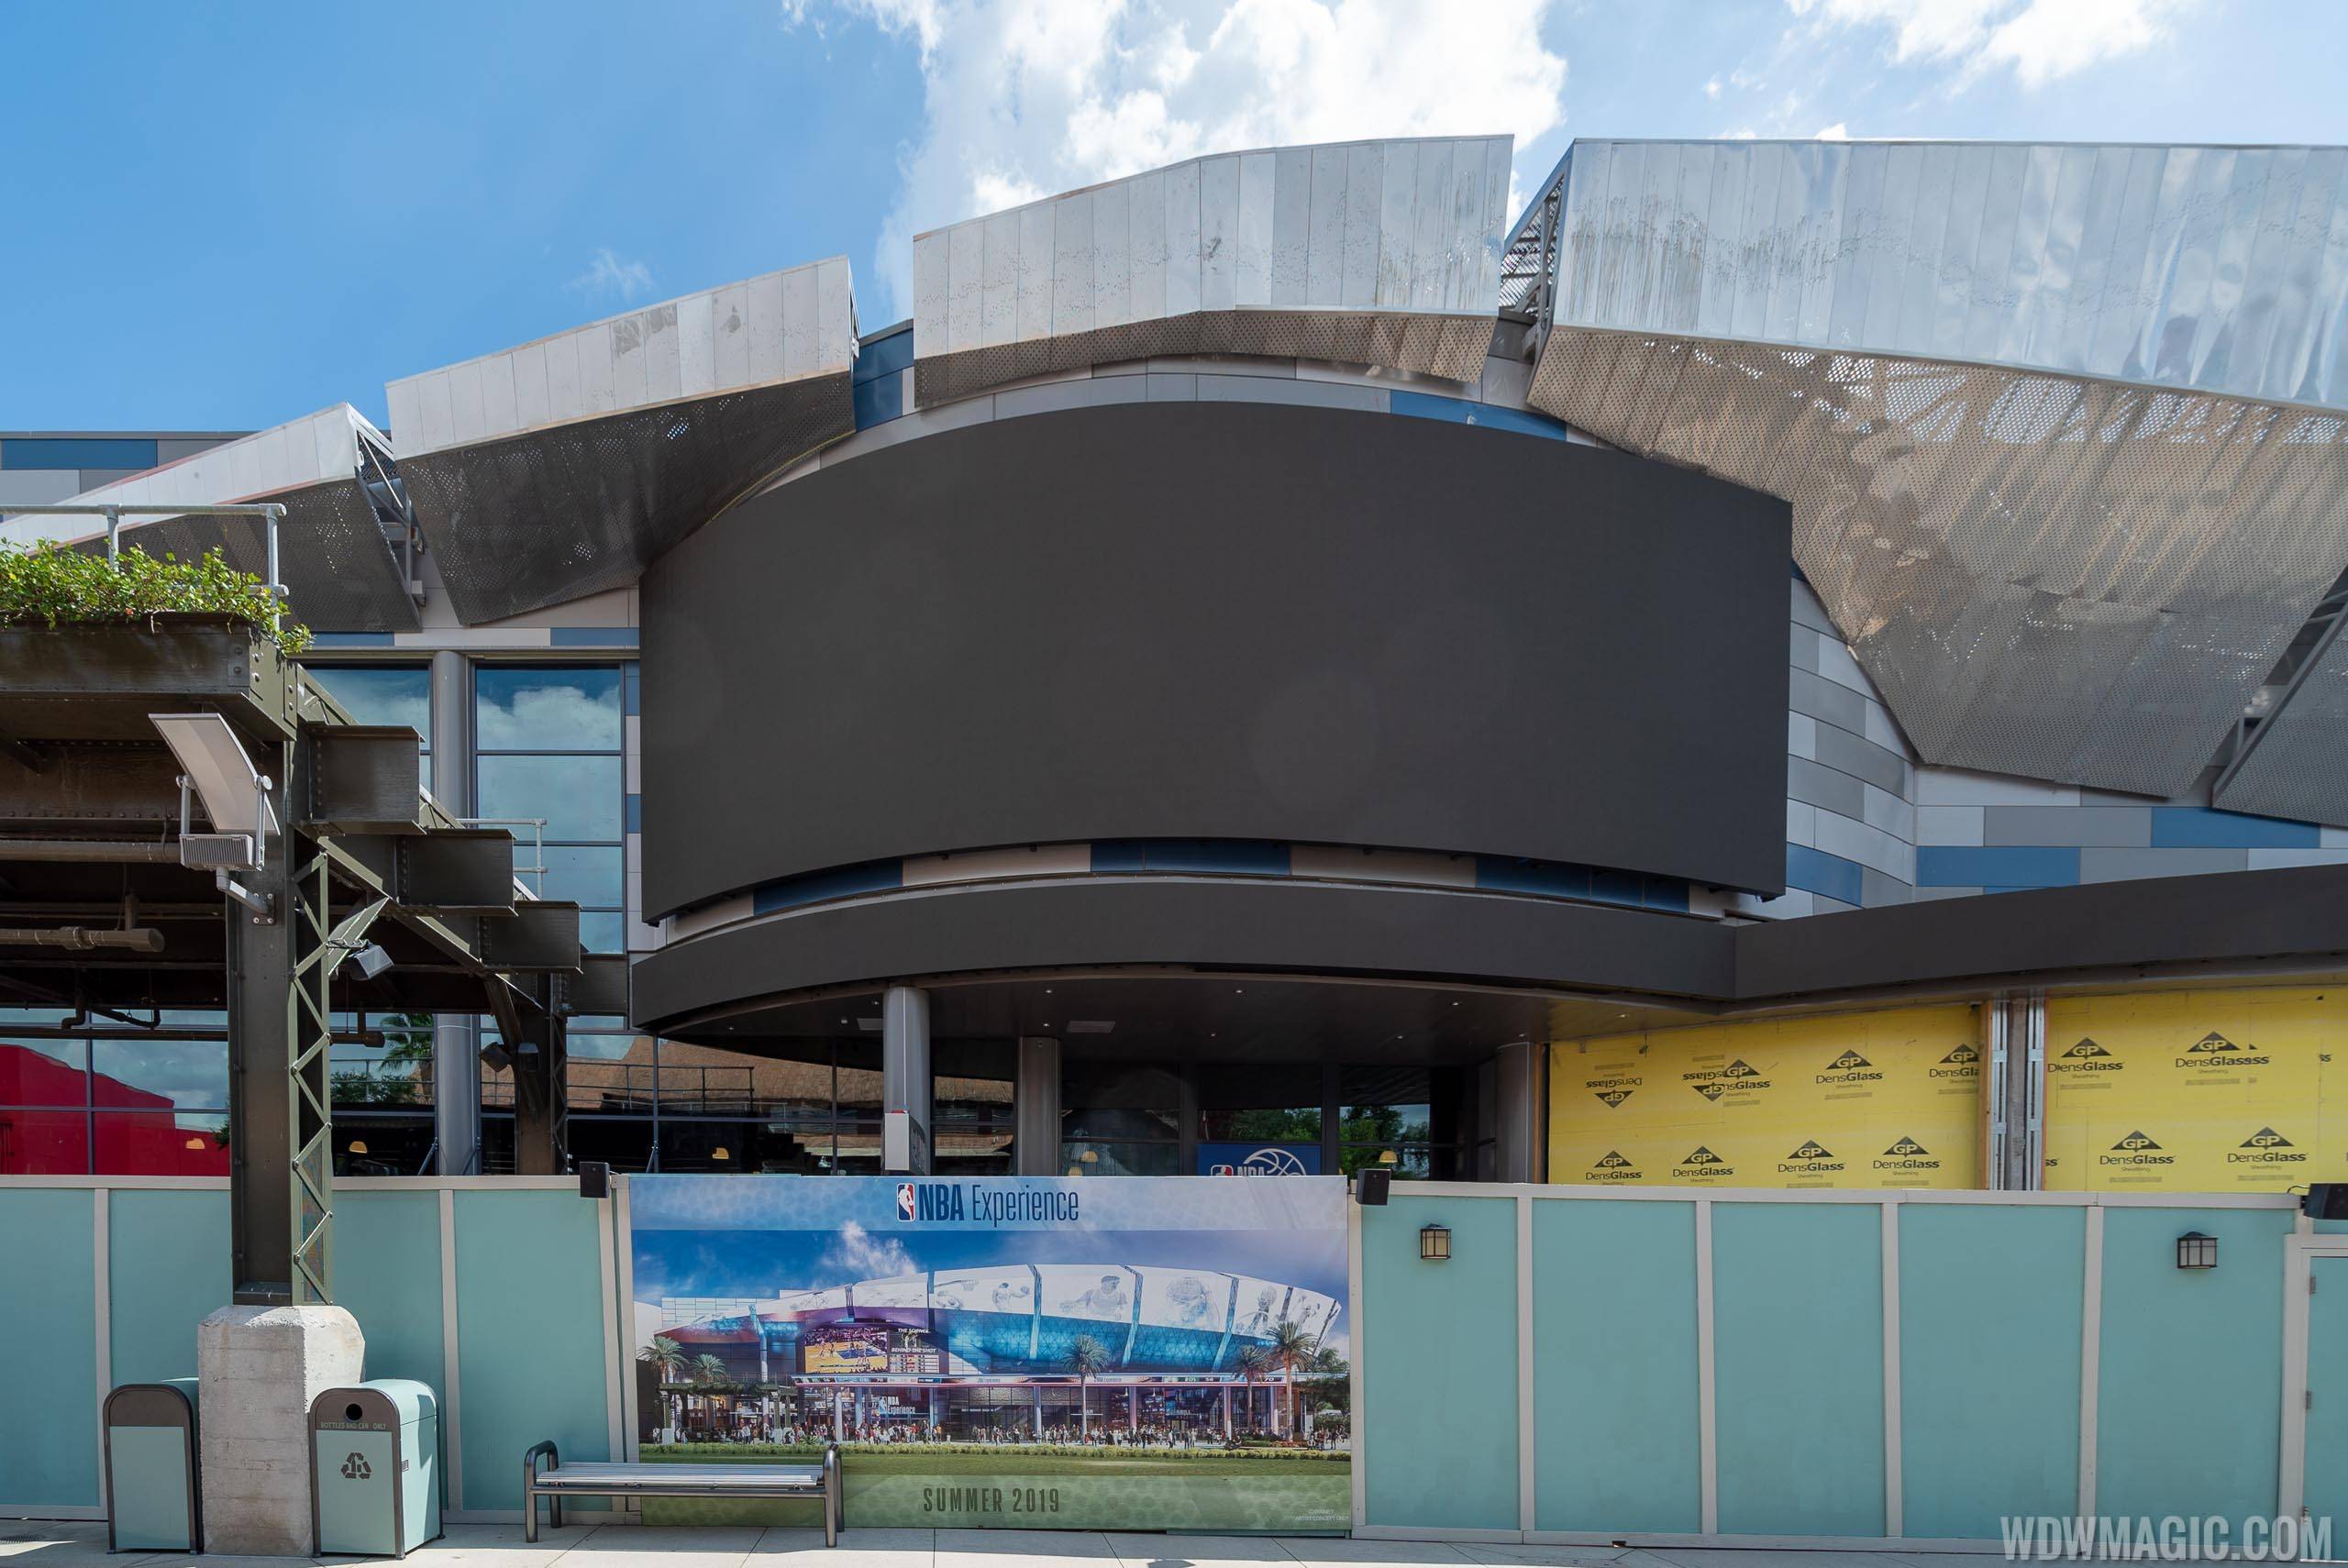 The NBA Experience and City Works construction - June 2019